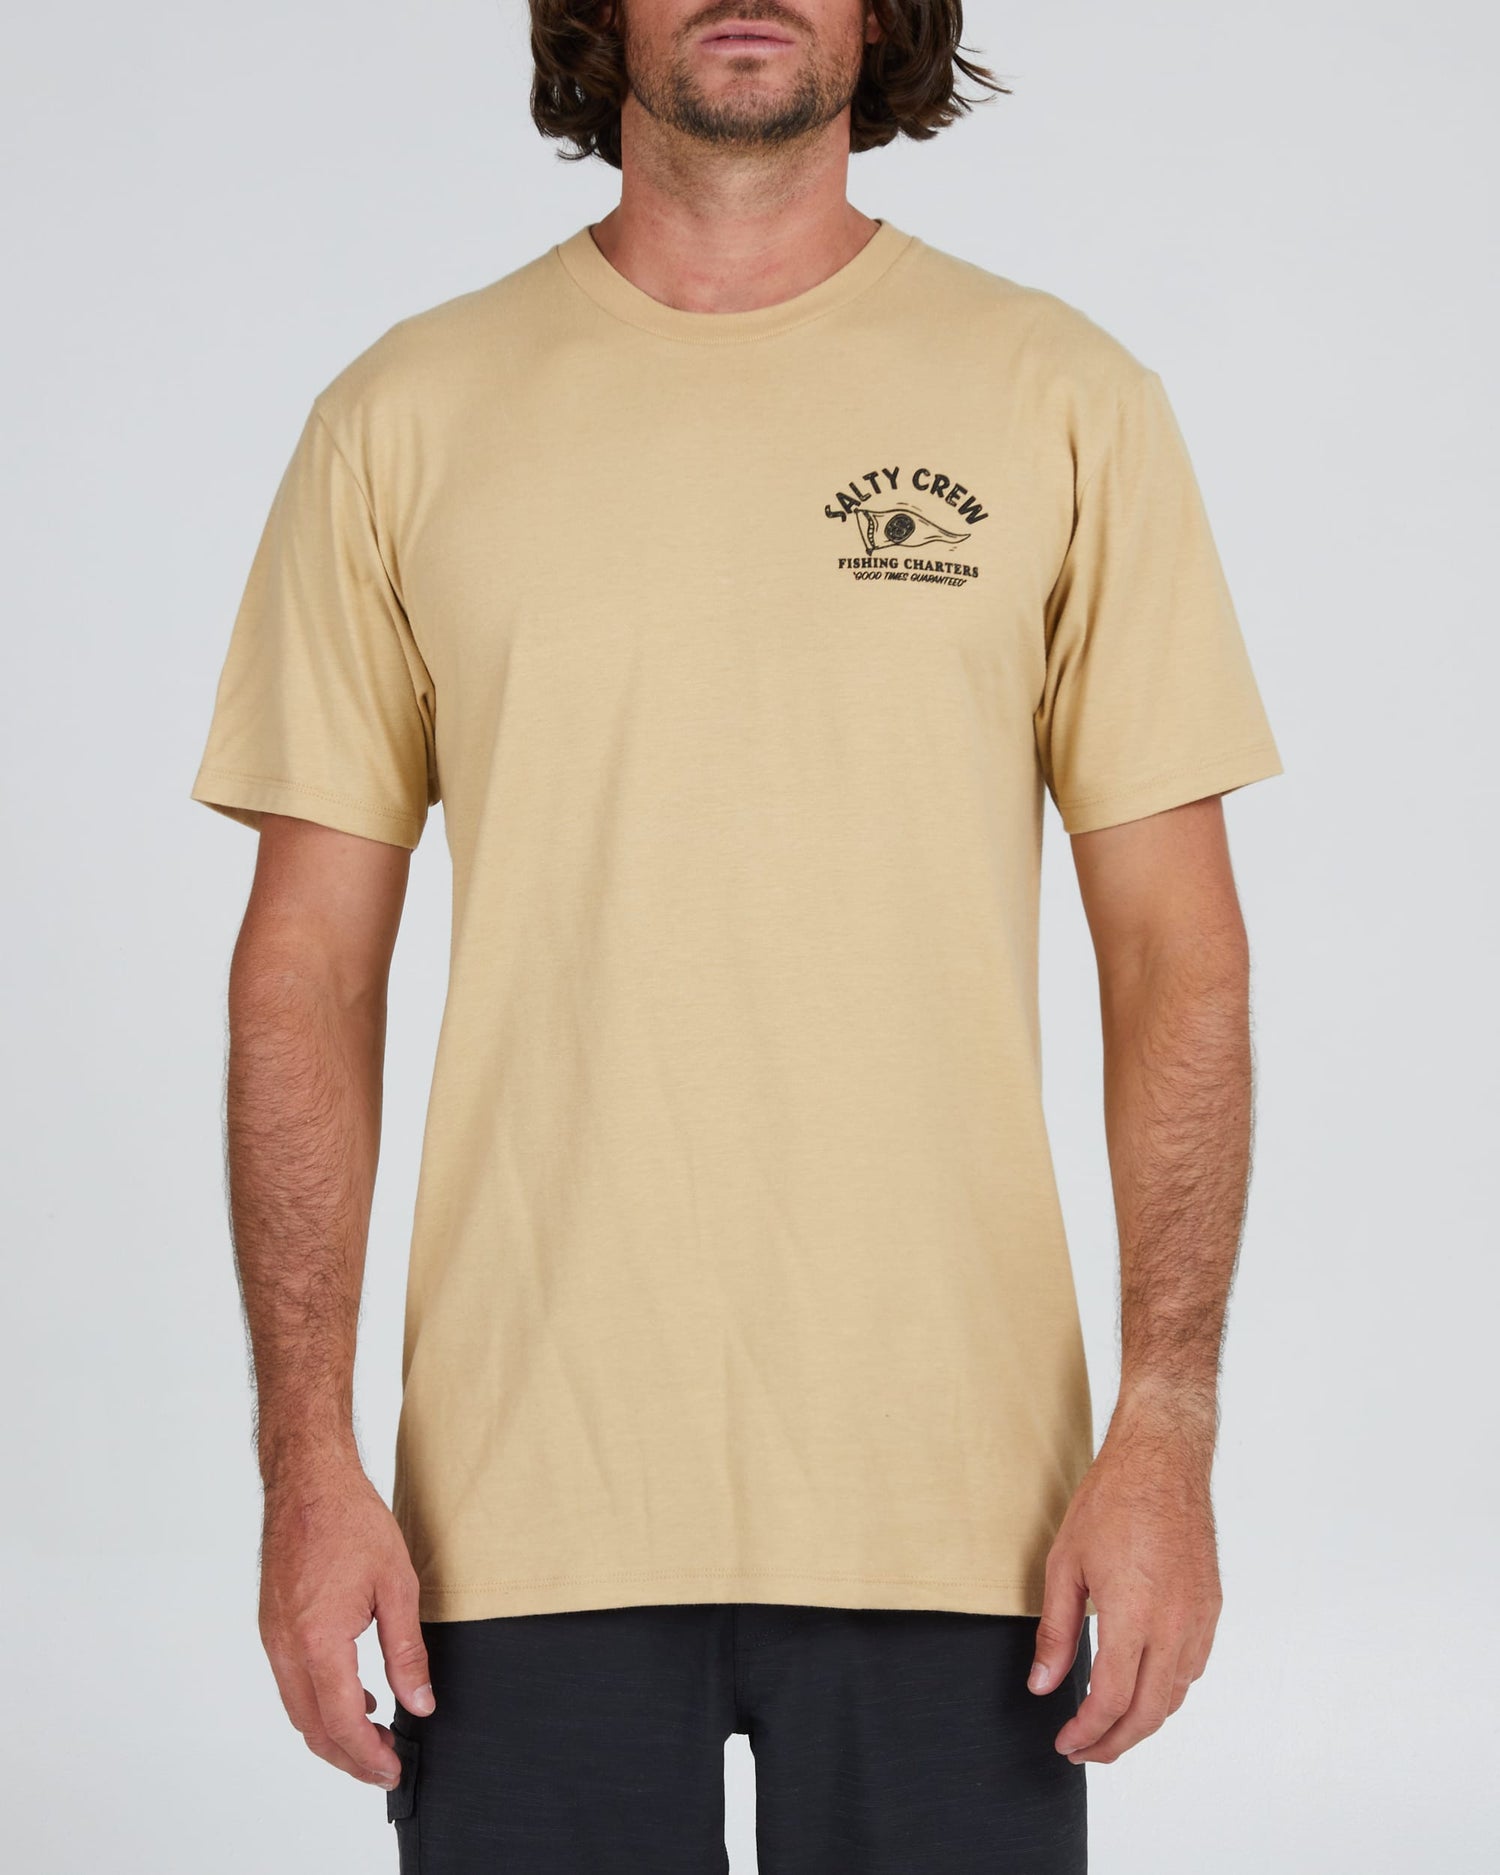 Salty crew T-SHIRTS S/S FISHING CHARTERS PREM S/S TEE - Camel in Camel